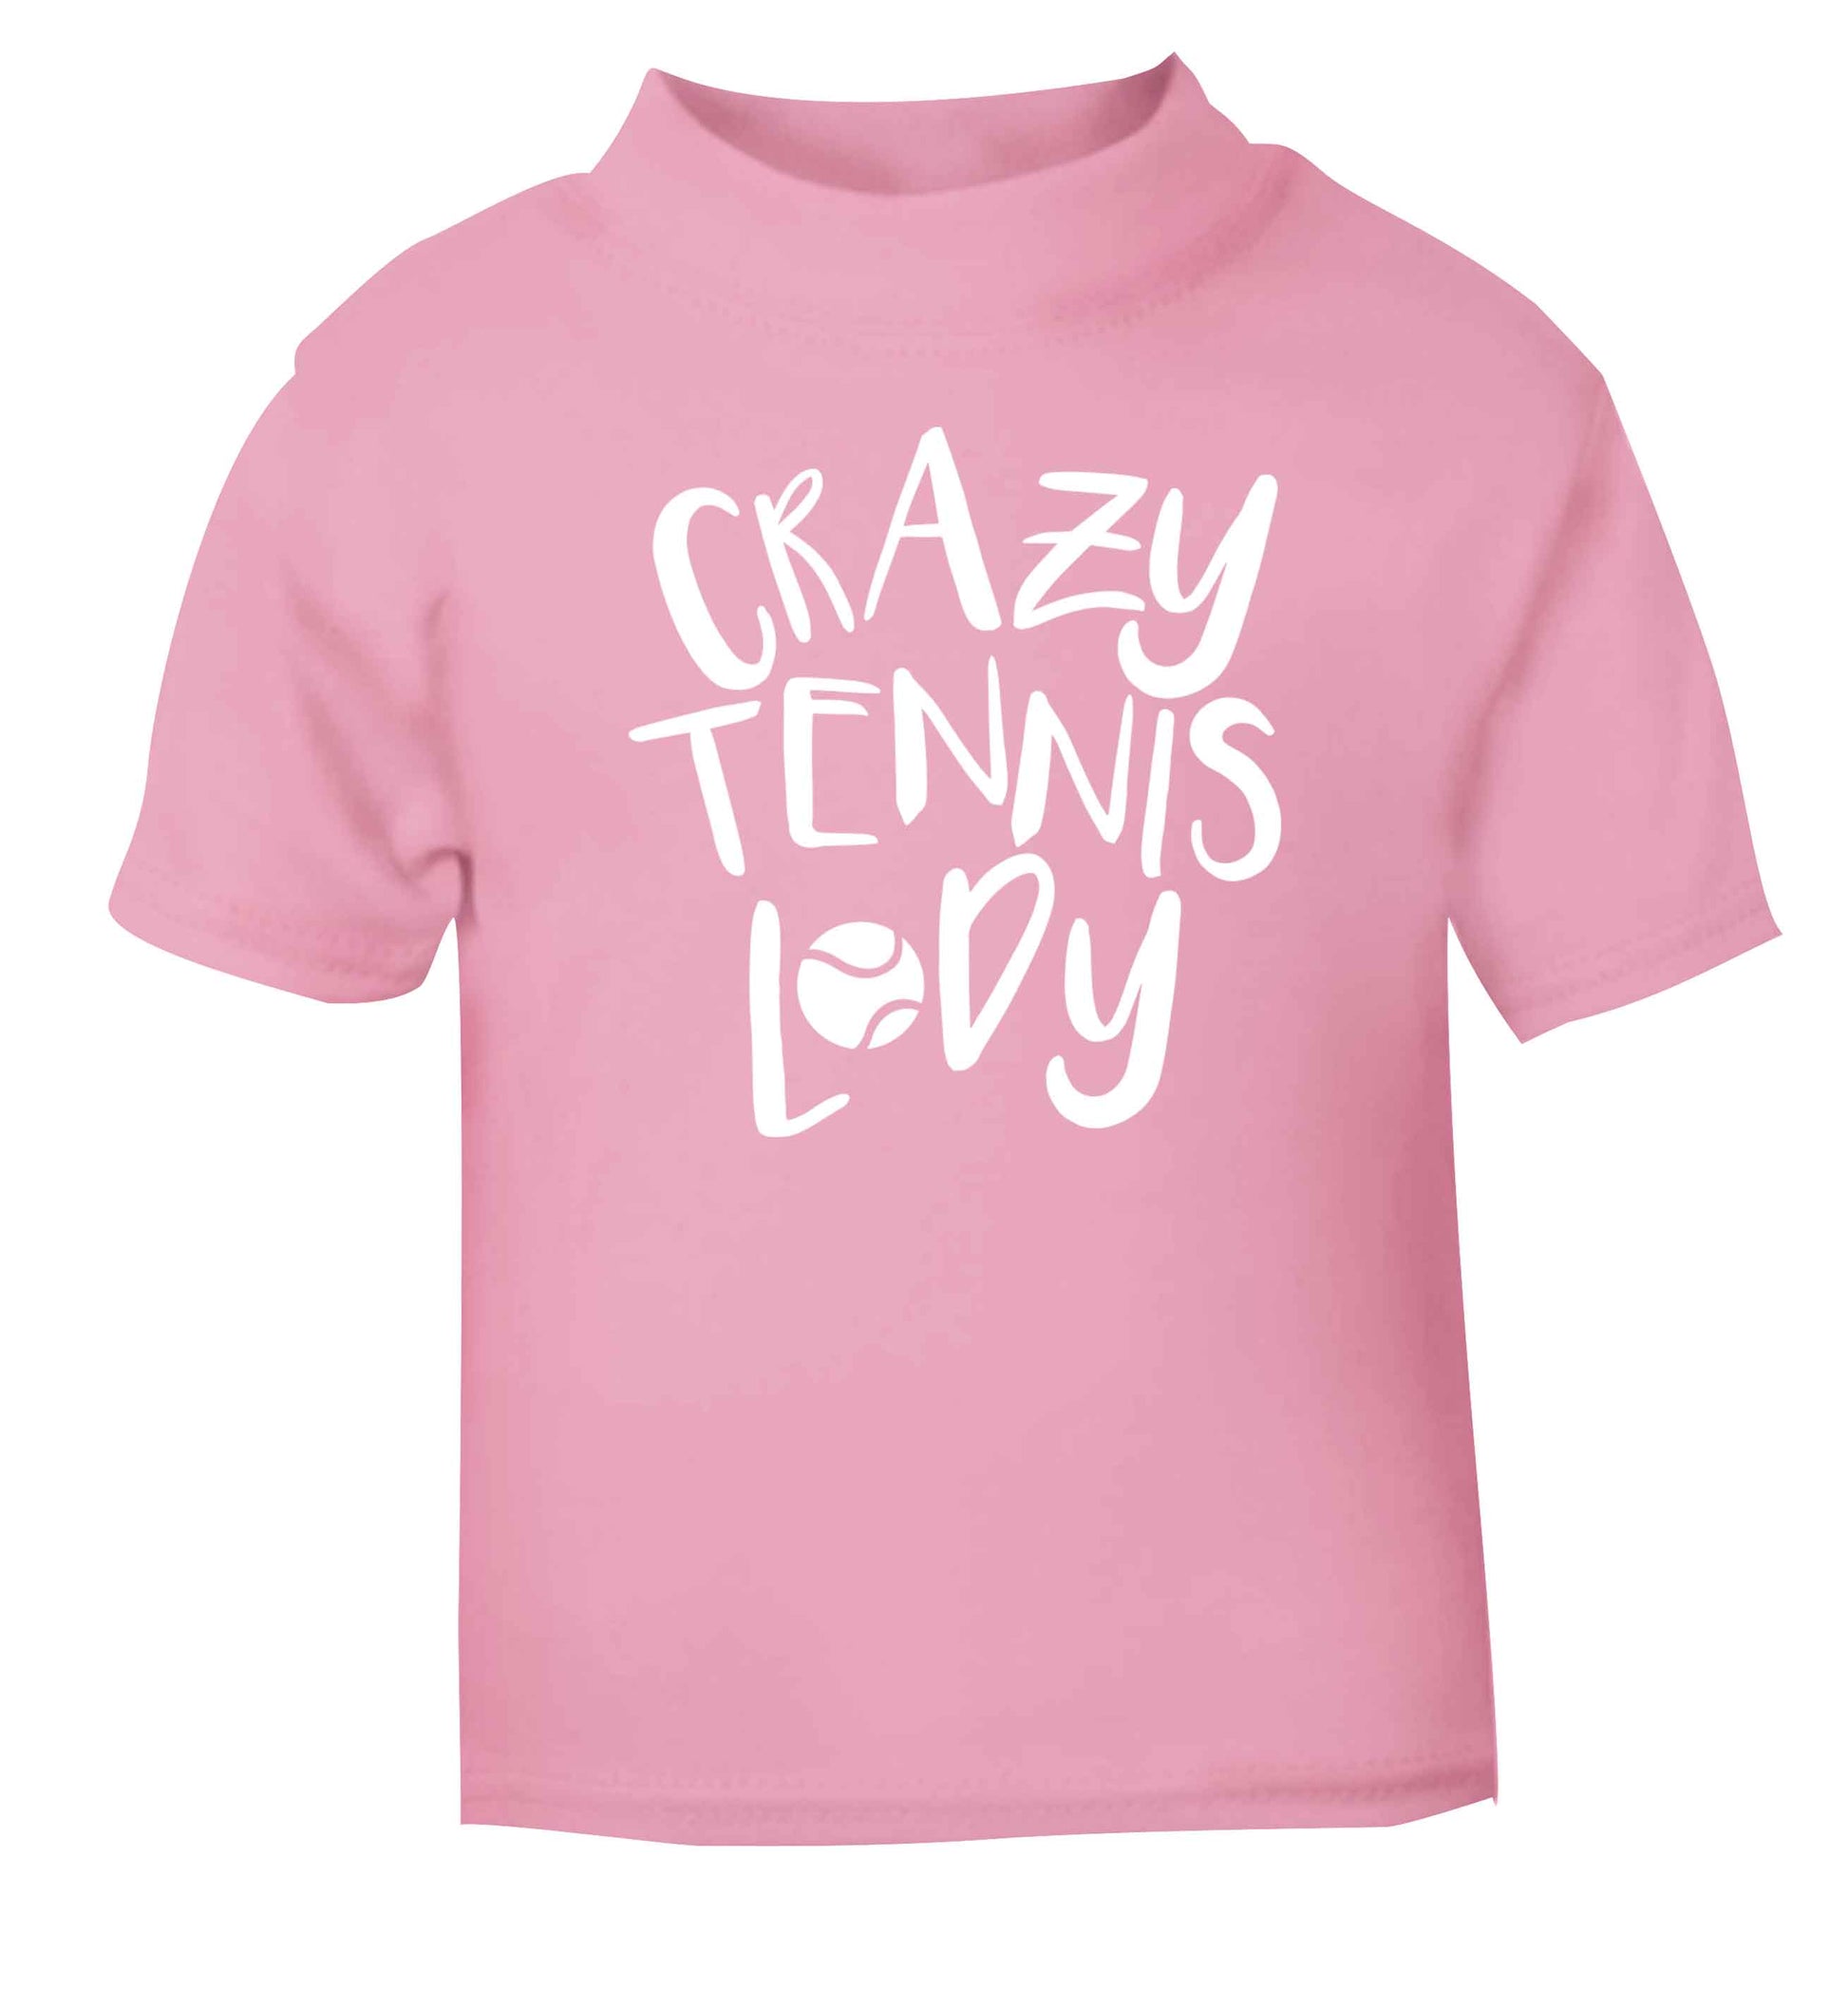 Crazy tennis lady light pink Baby Toddler Tshirt 2 Years